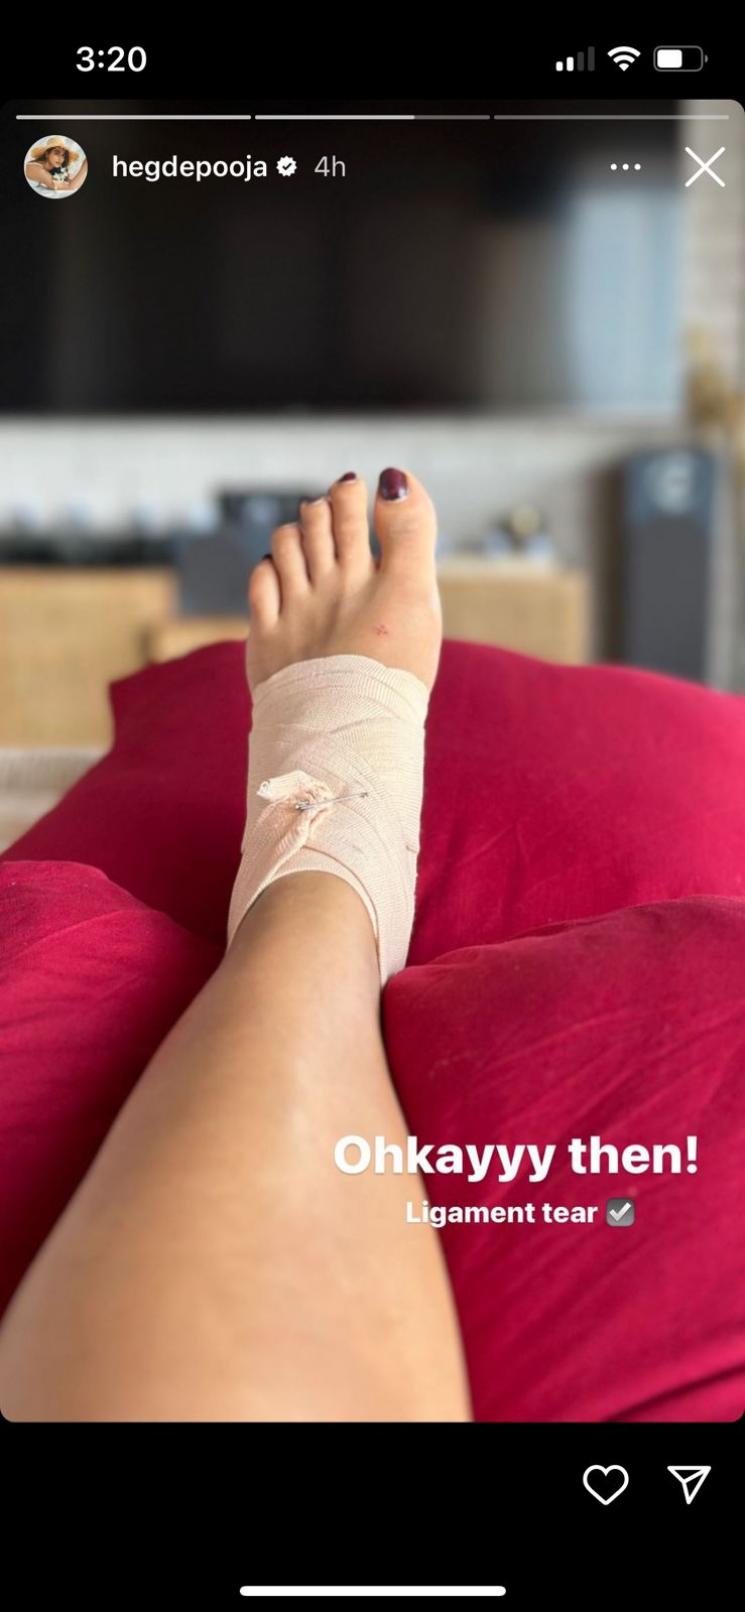 actress pooja hegde ligament tear in leg fans wish speedy recovery